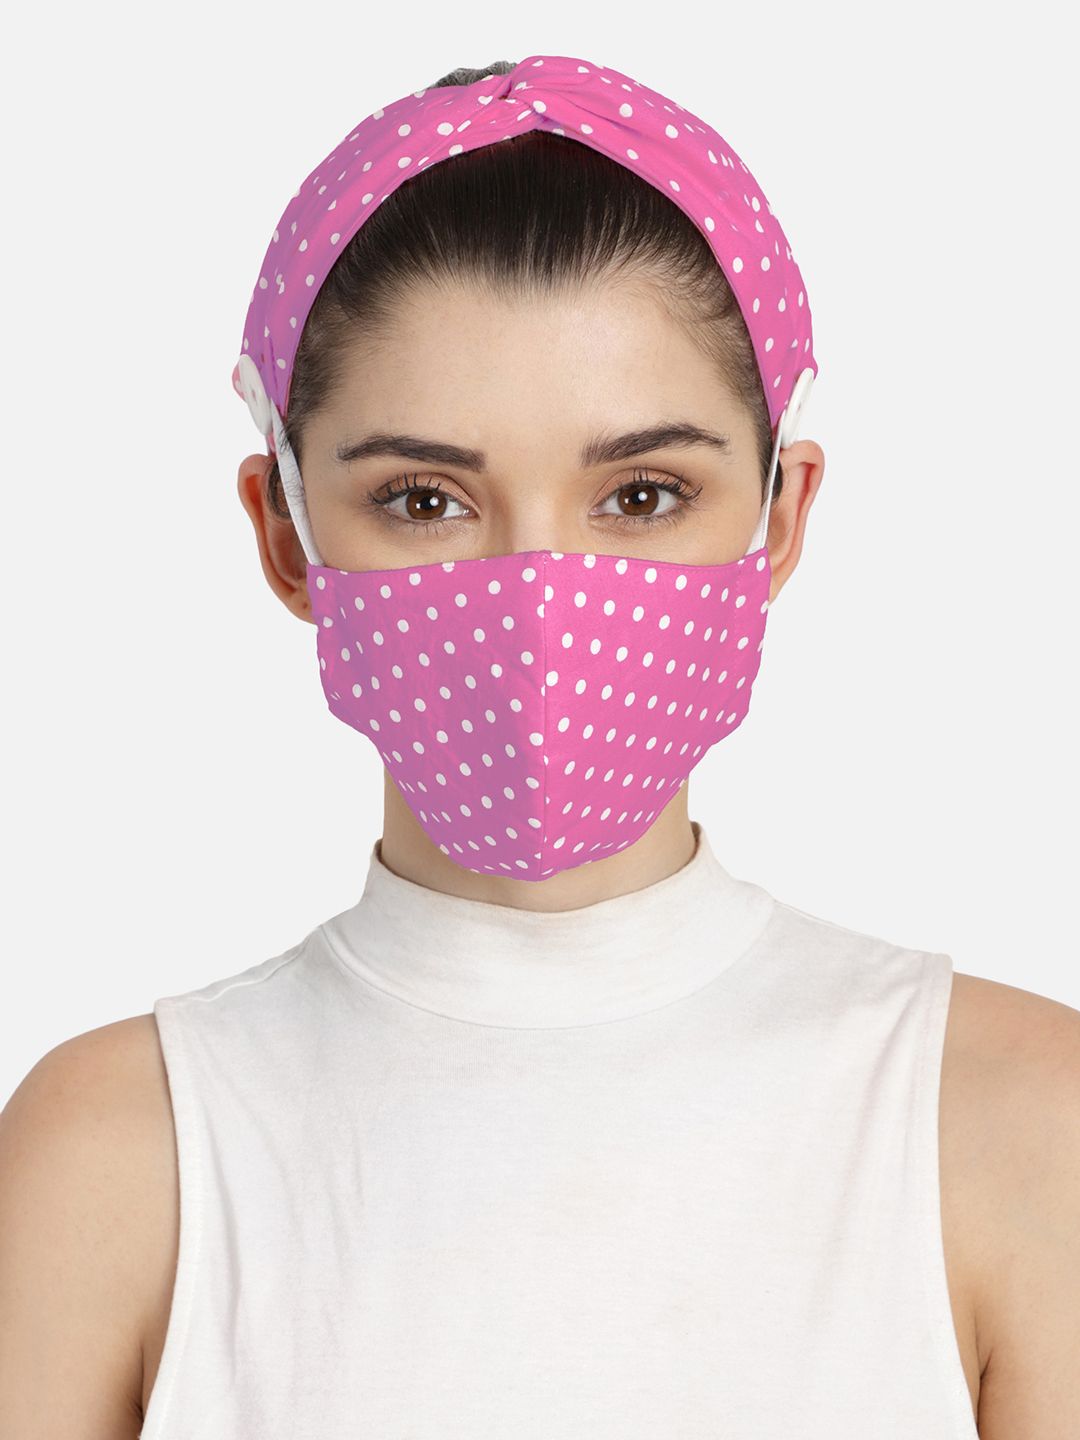 Anekaant 3-Ply Pink & White Polka Dot Printed Cotton Fabric Fashion Hairband & Mask Price in India